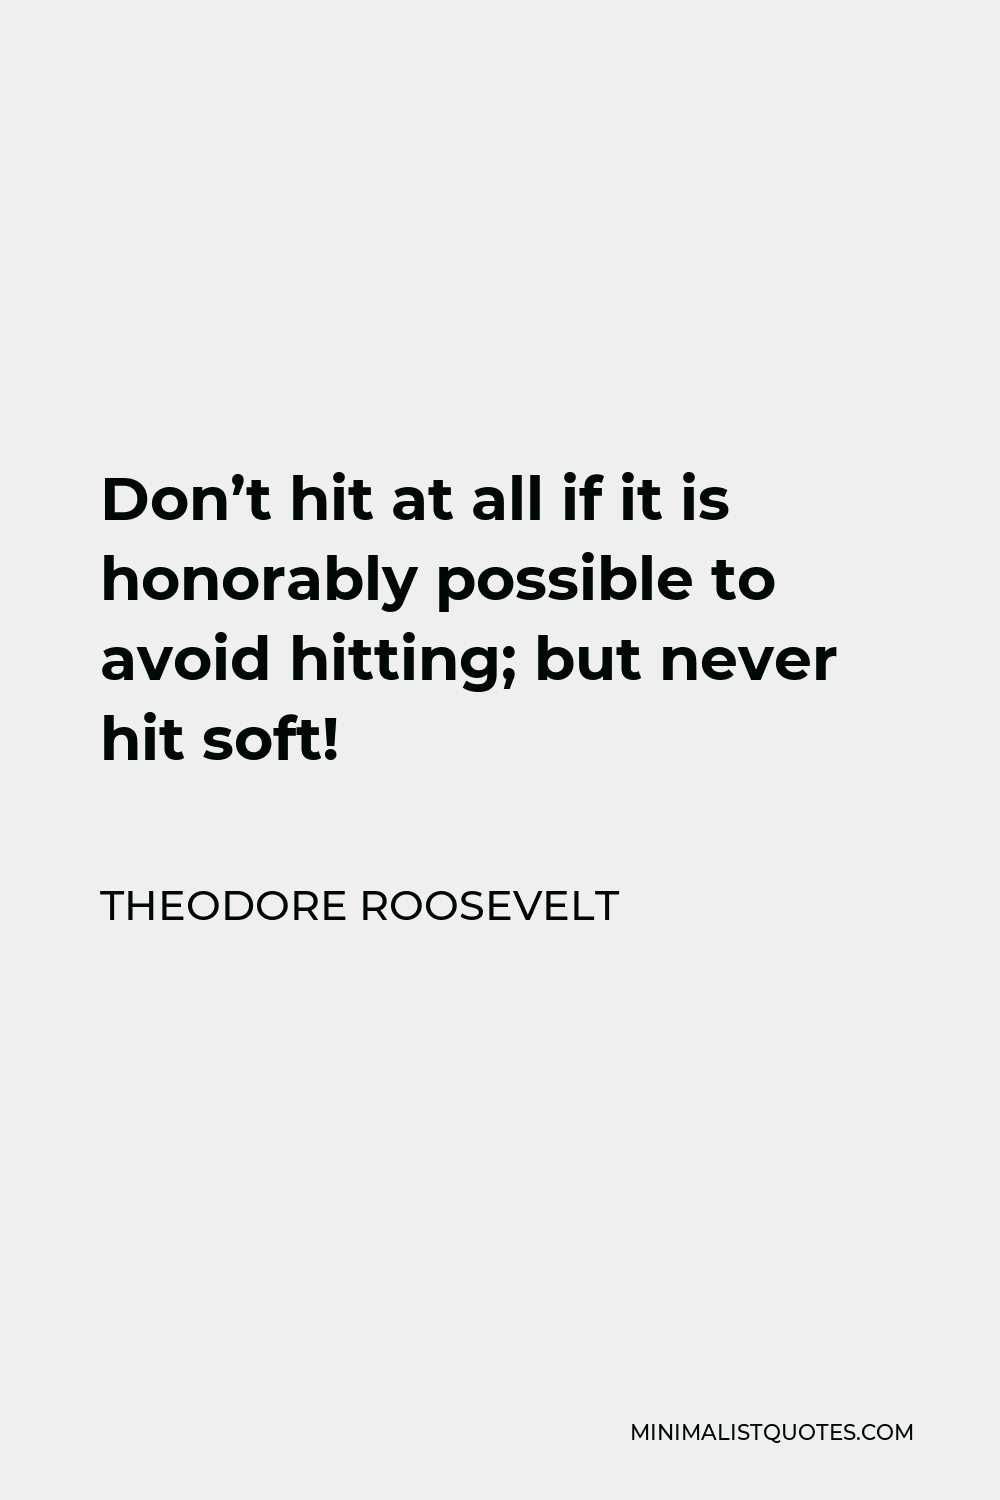 Theodore Roosevelt Quote - Don’t hit at all if it is honorably possible to avoid hitting; but never hit soft!